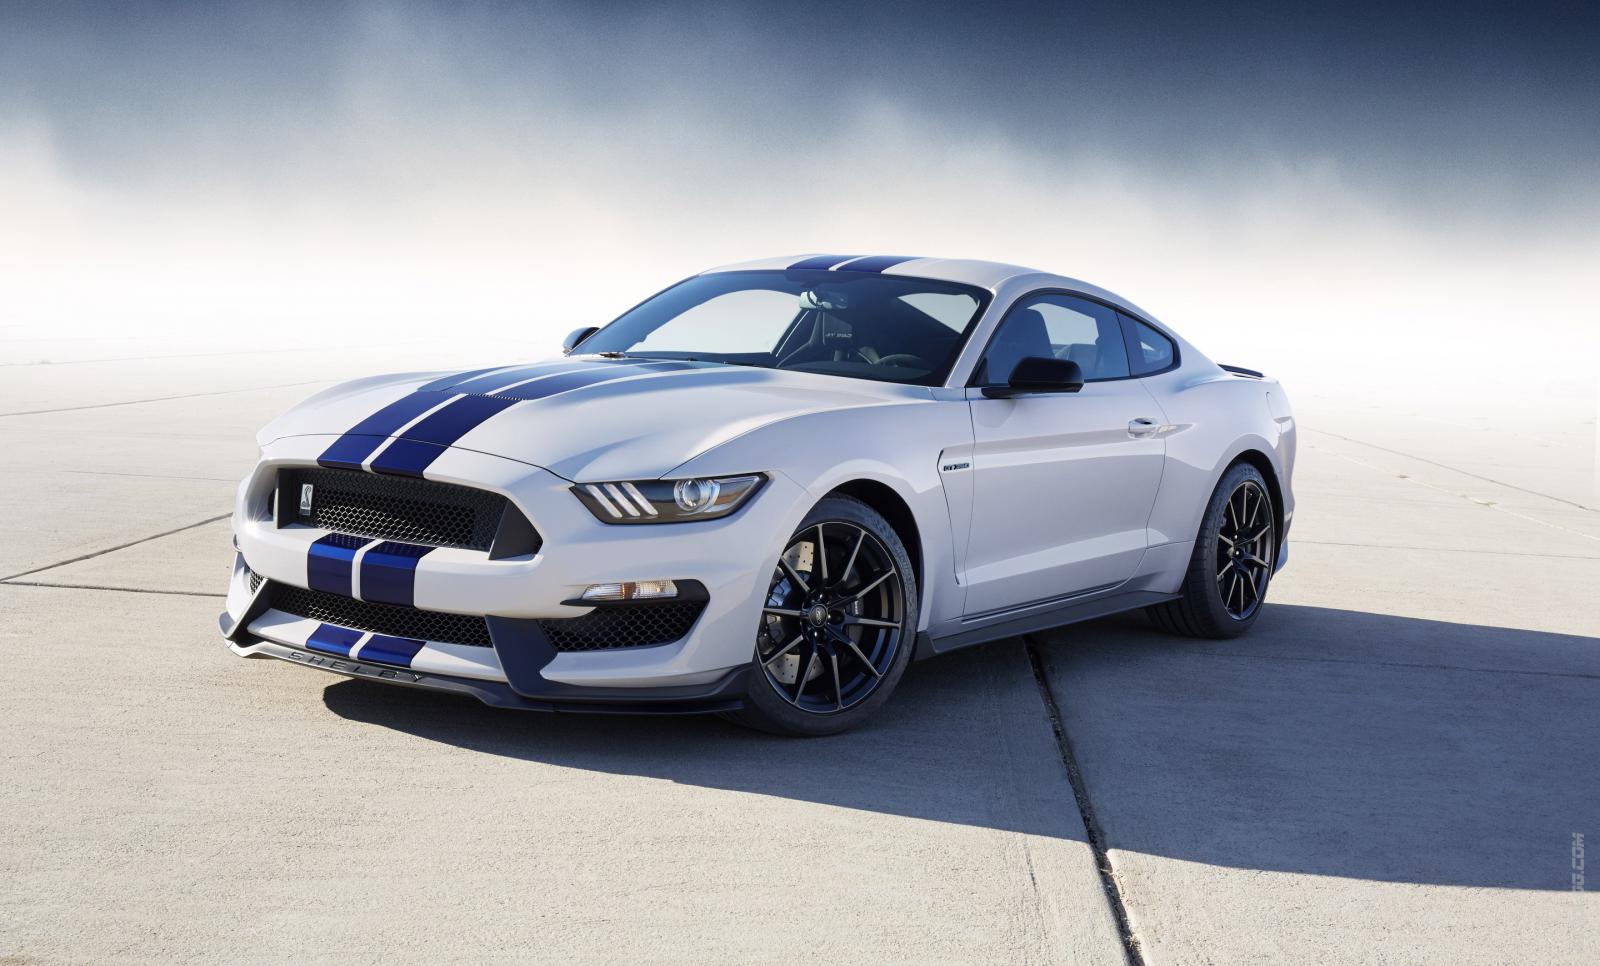 Ford Mustang Shelby GT500 2015 - image #250